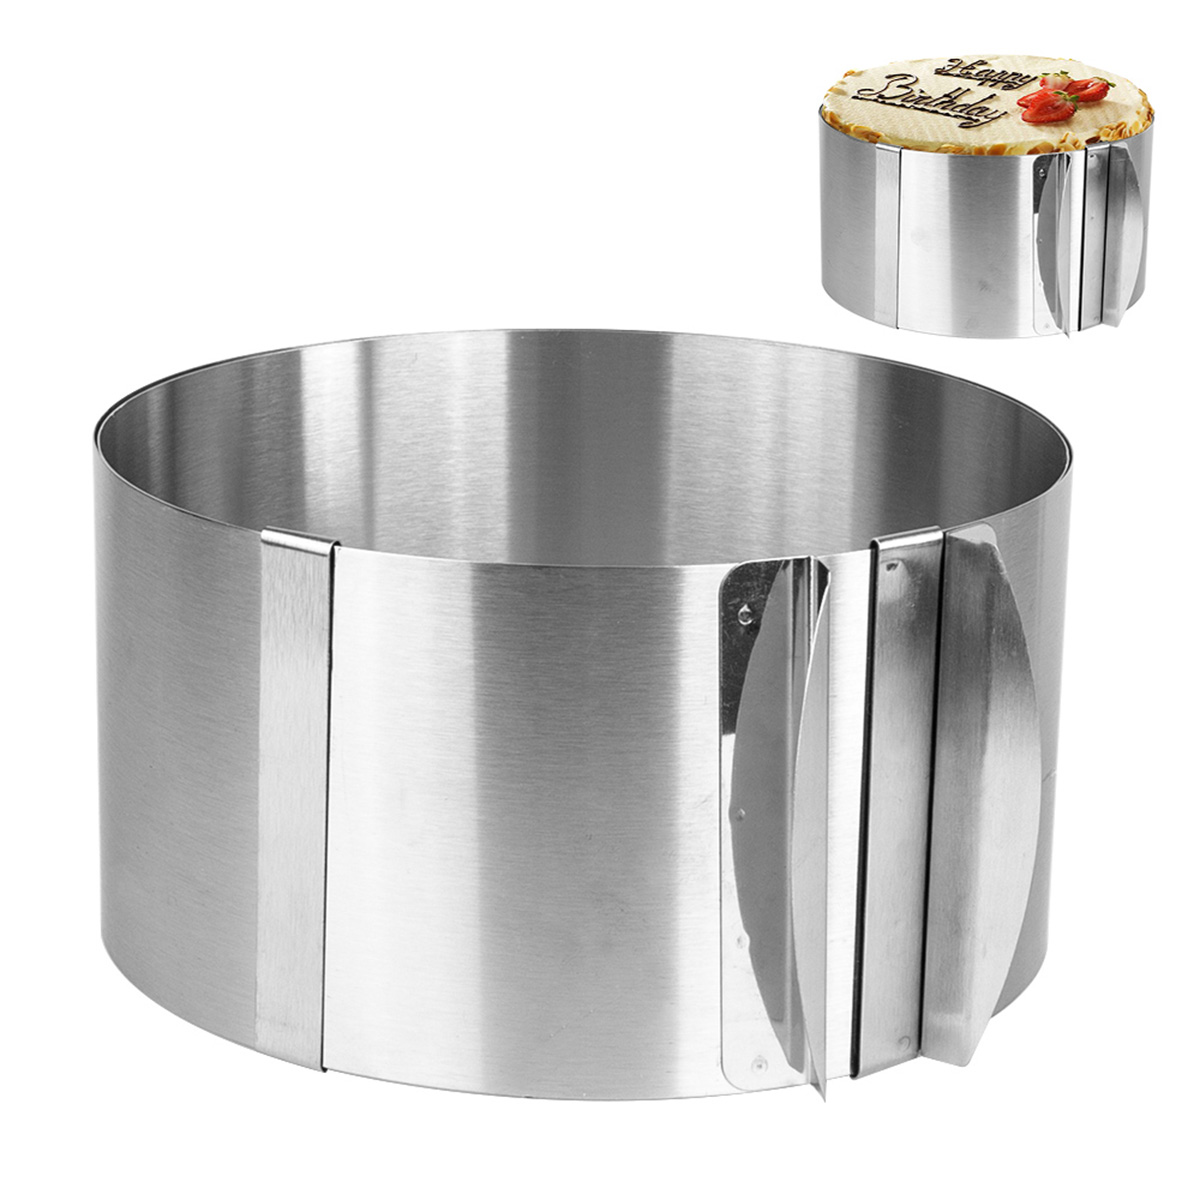 1Pc Cake Mould Mold Adjustable Bakeware Stainless Steel Mousse Ring Baking Tool